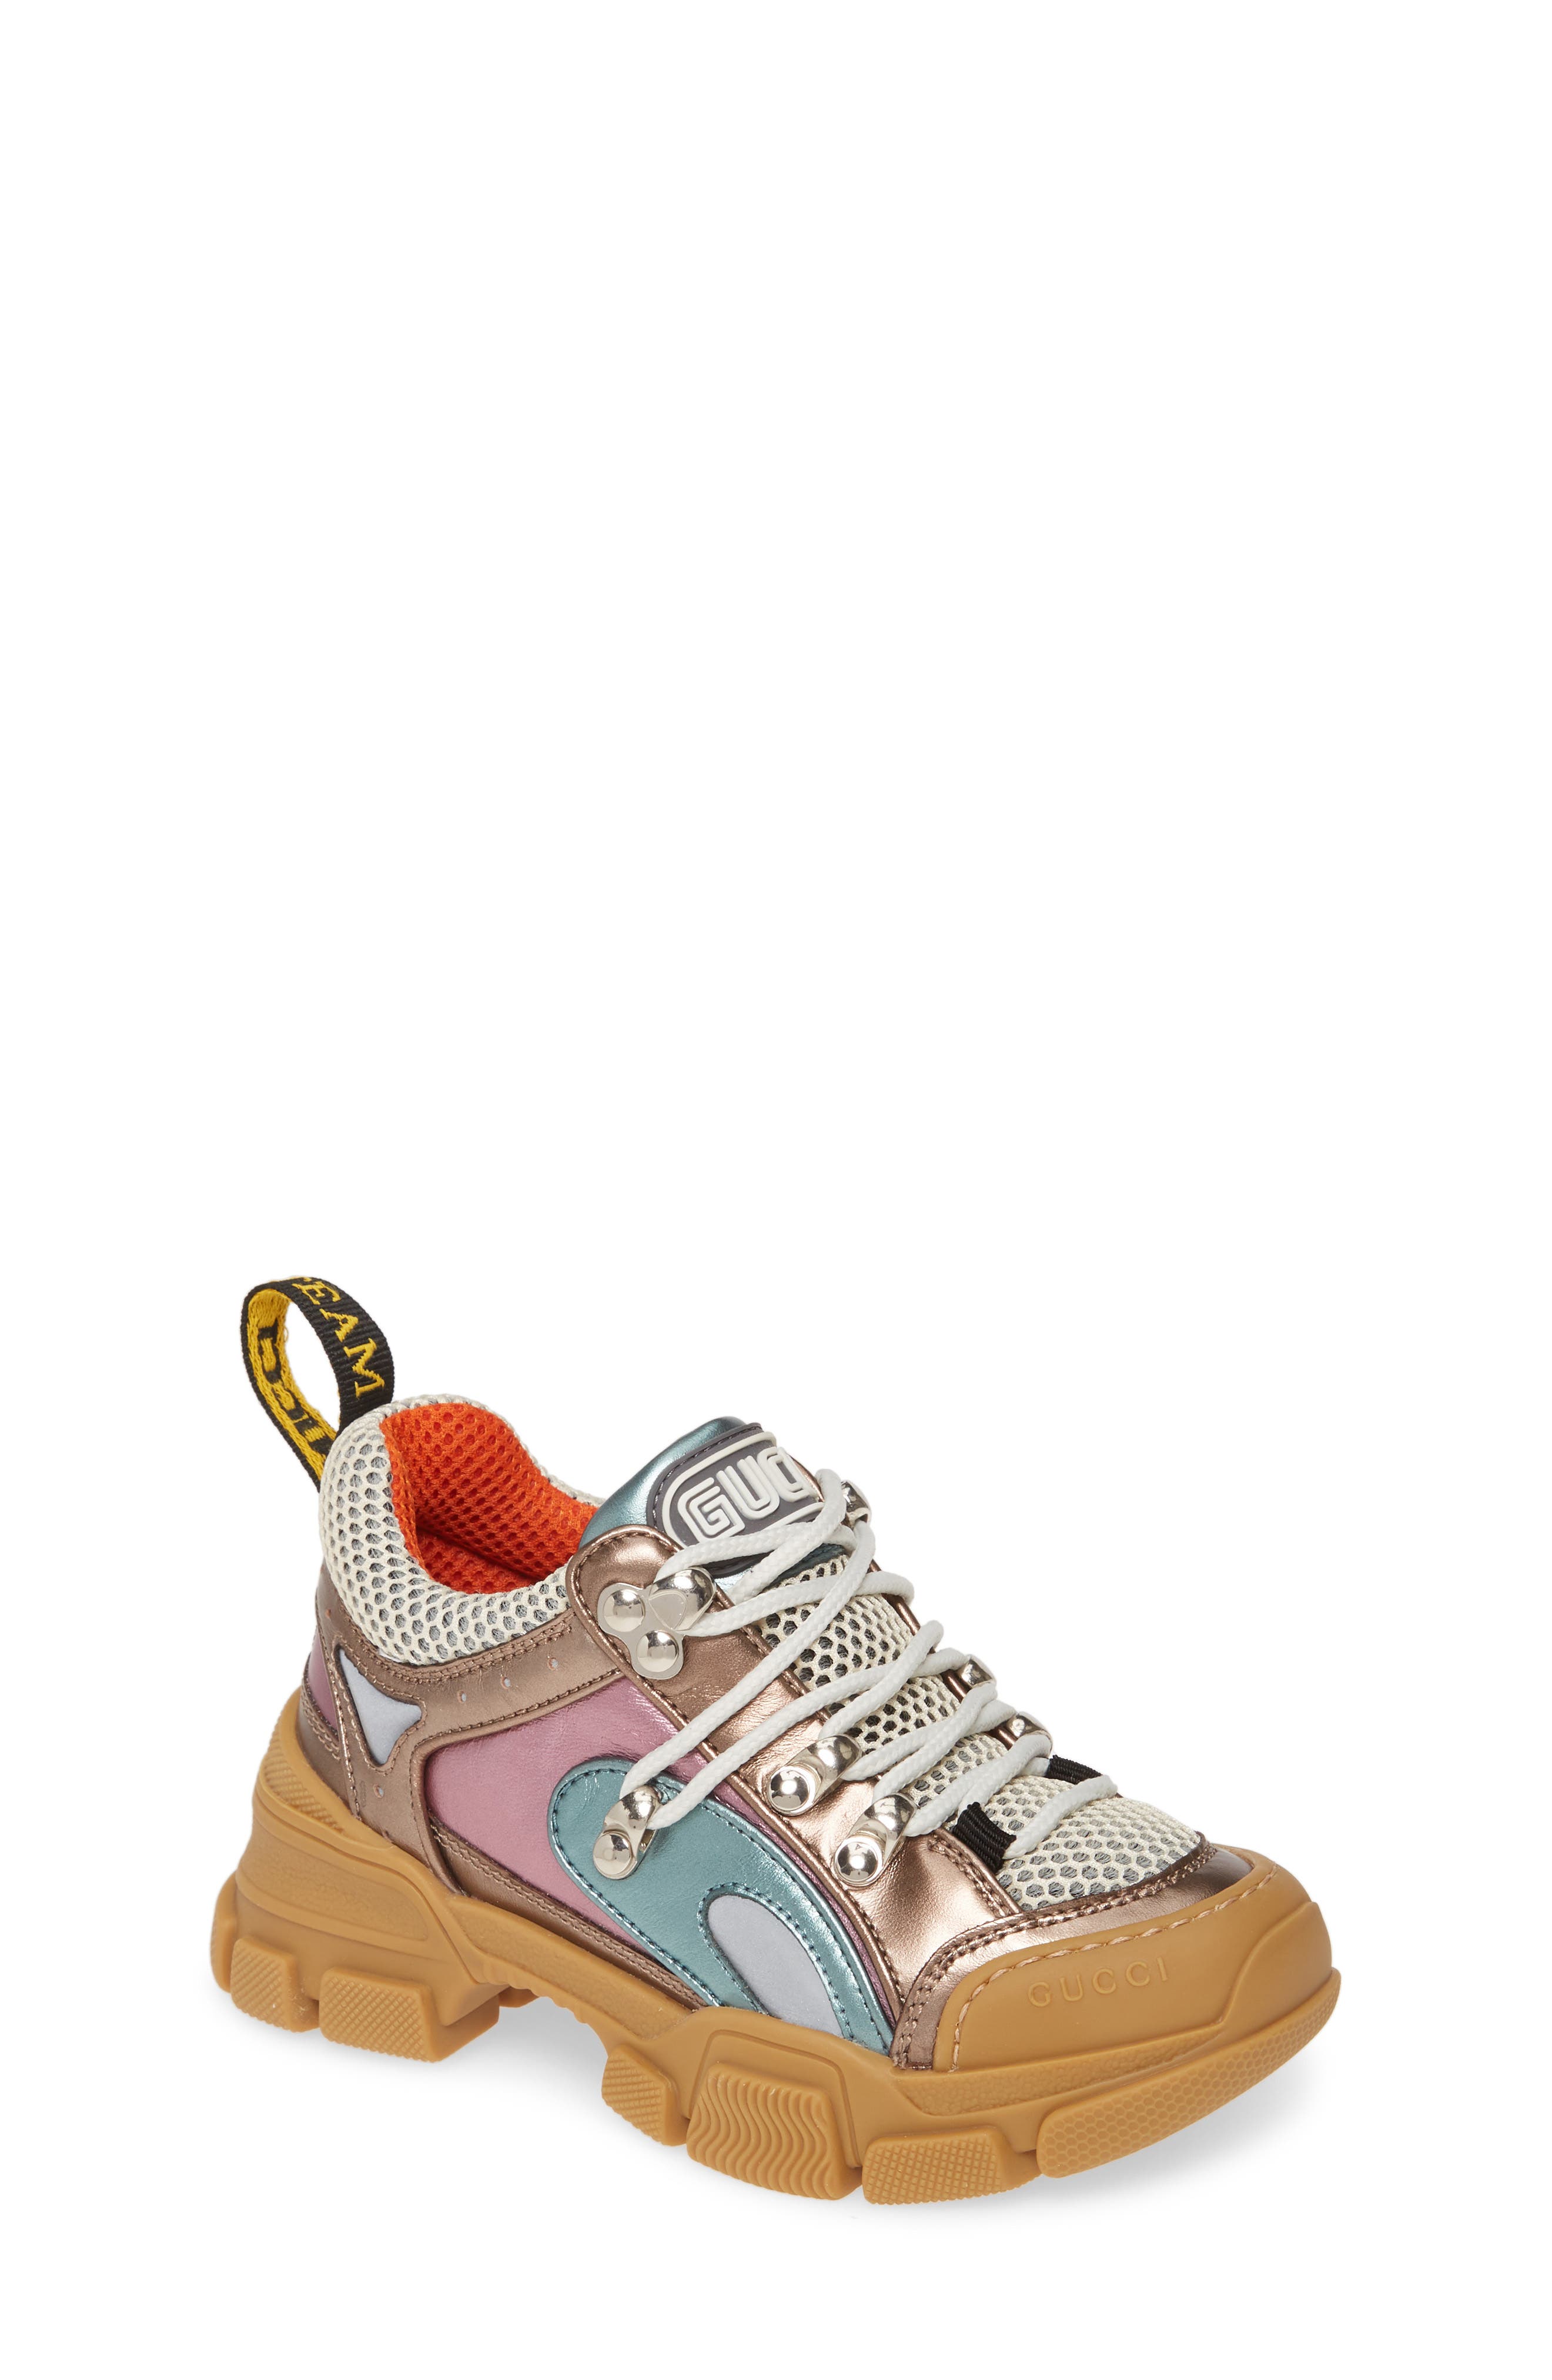 gucci sneakers with chains